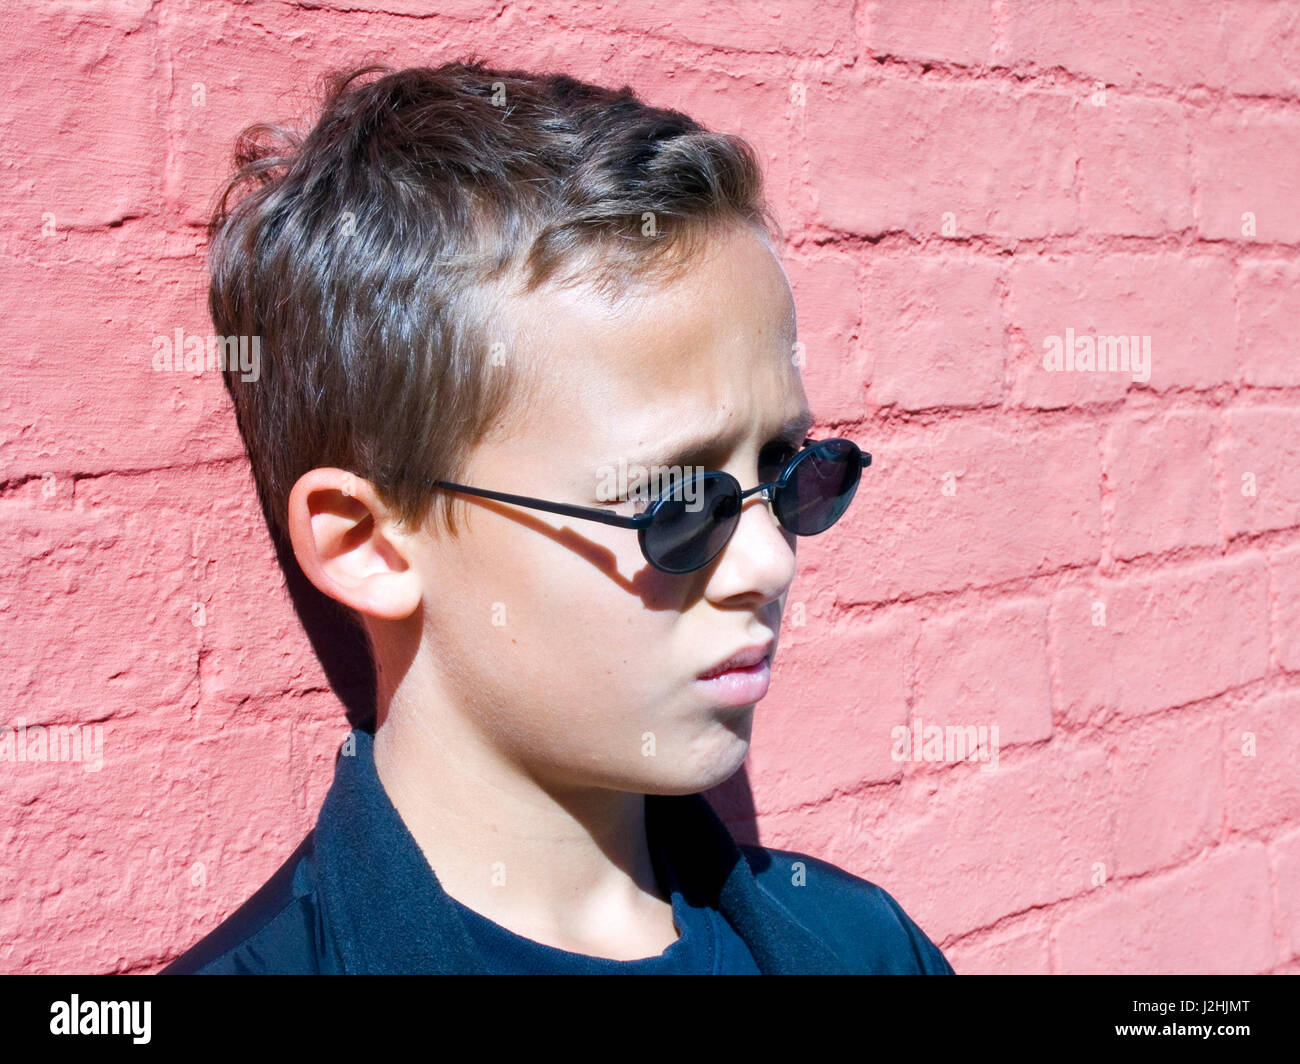 Boy against wall Stock Photo